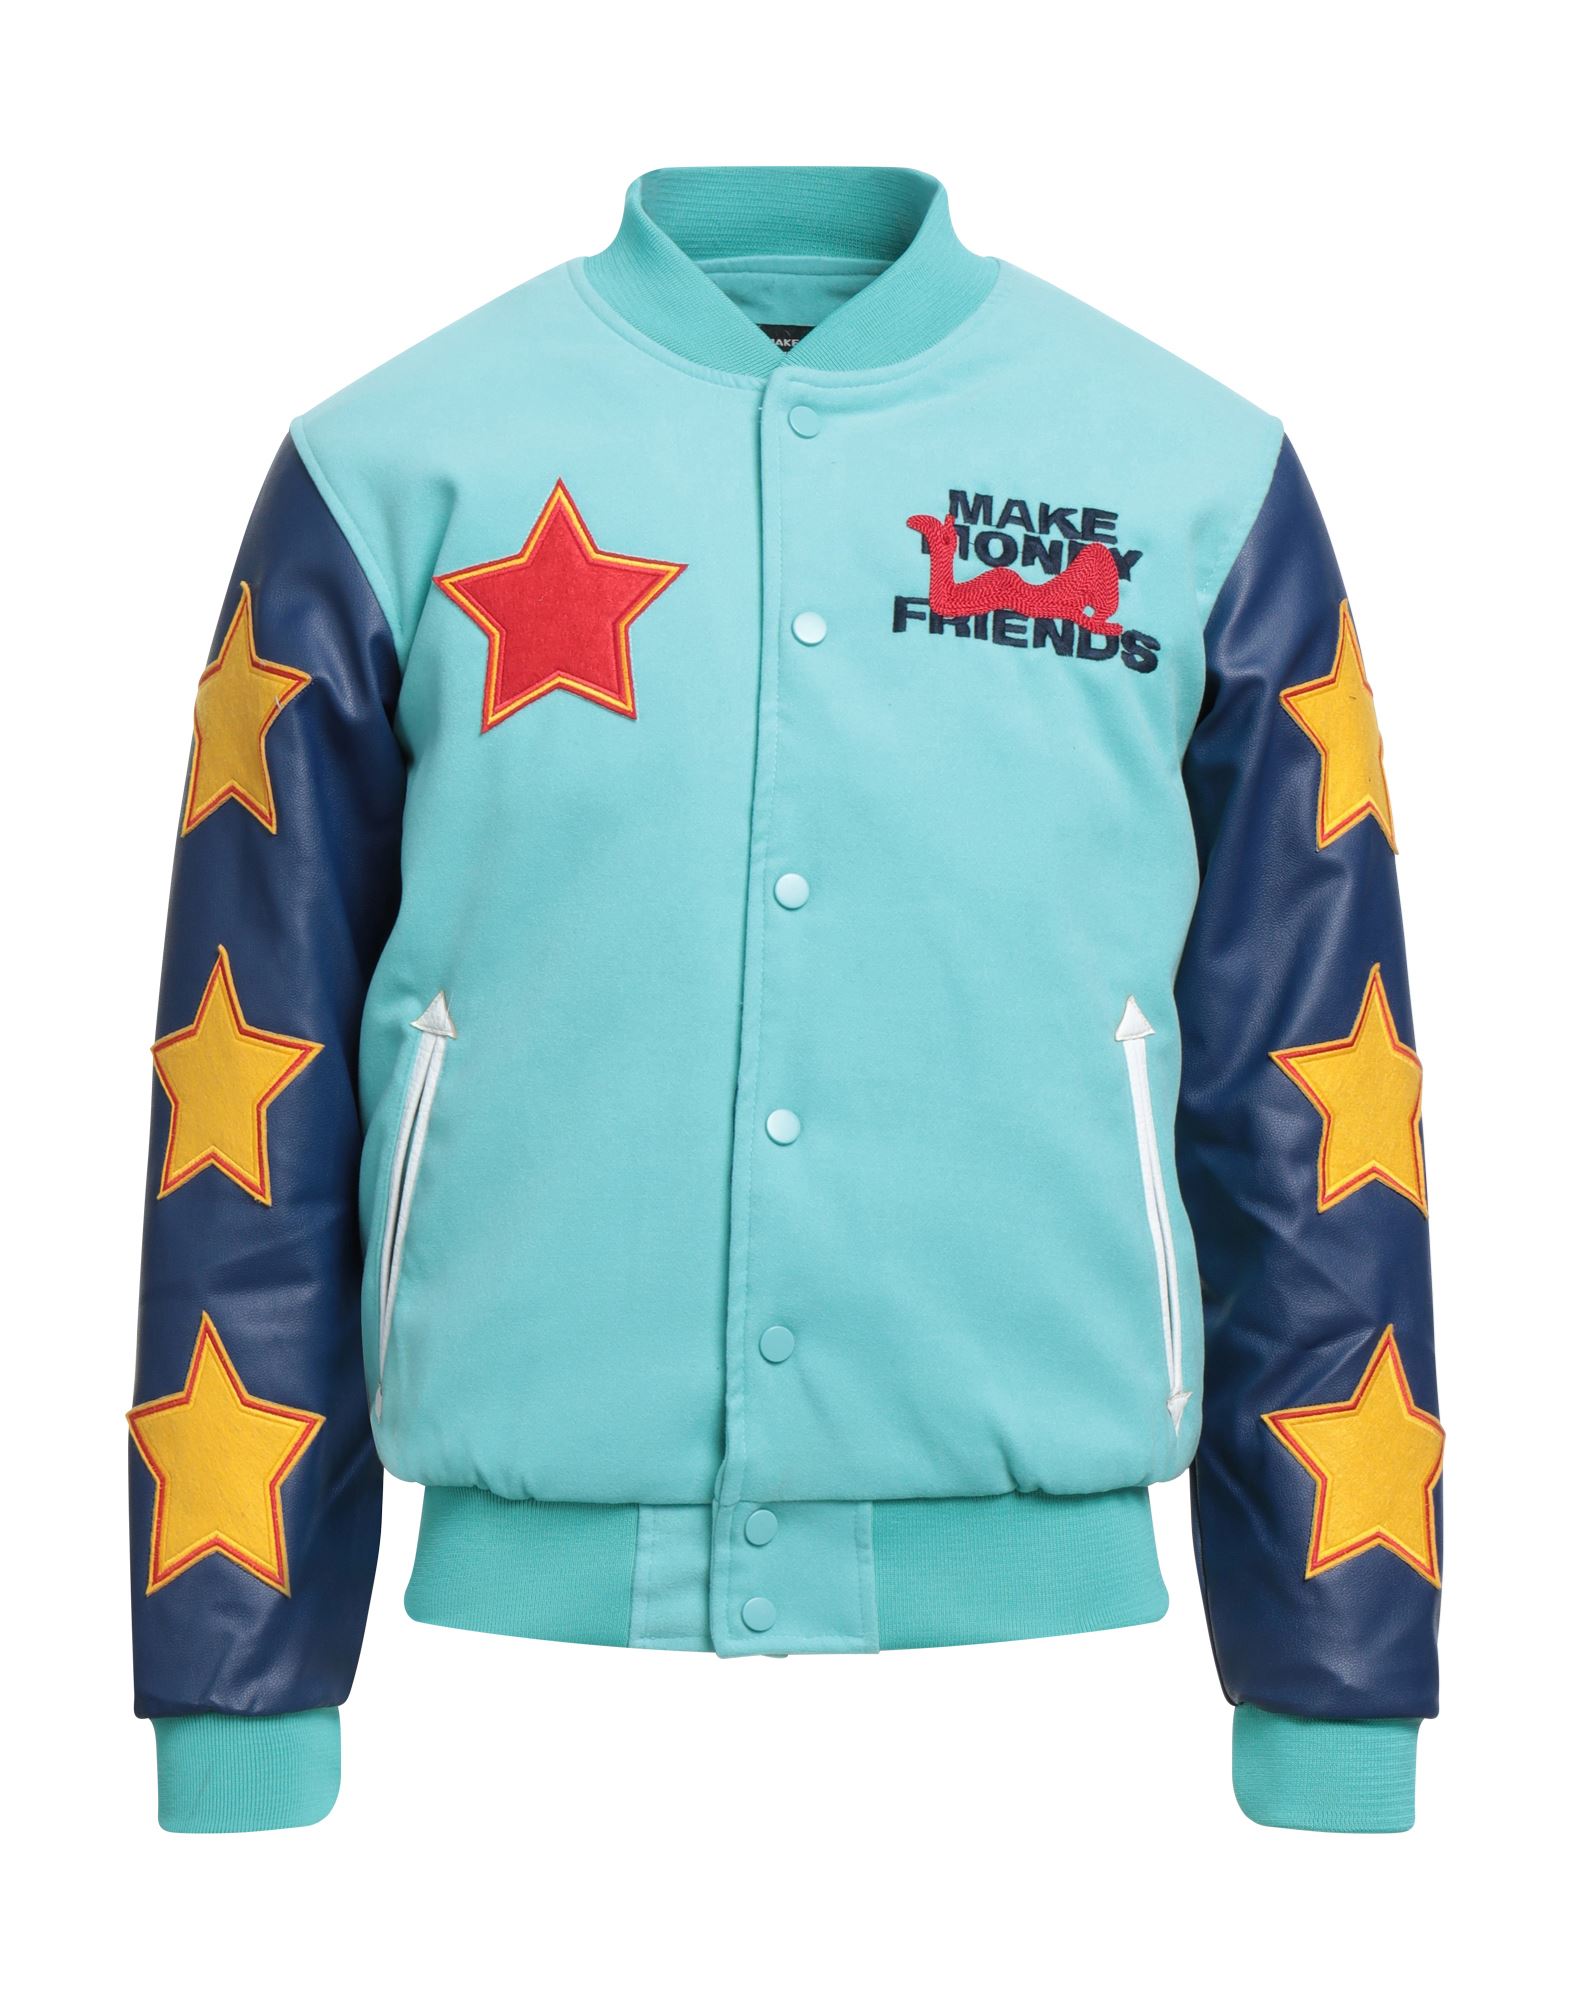 Make Money Not Friends Jackets In Turquoise